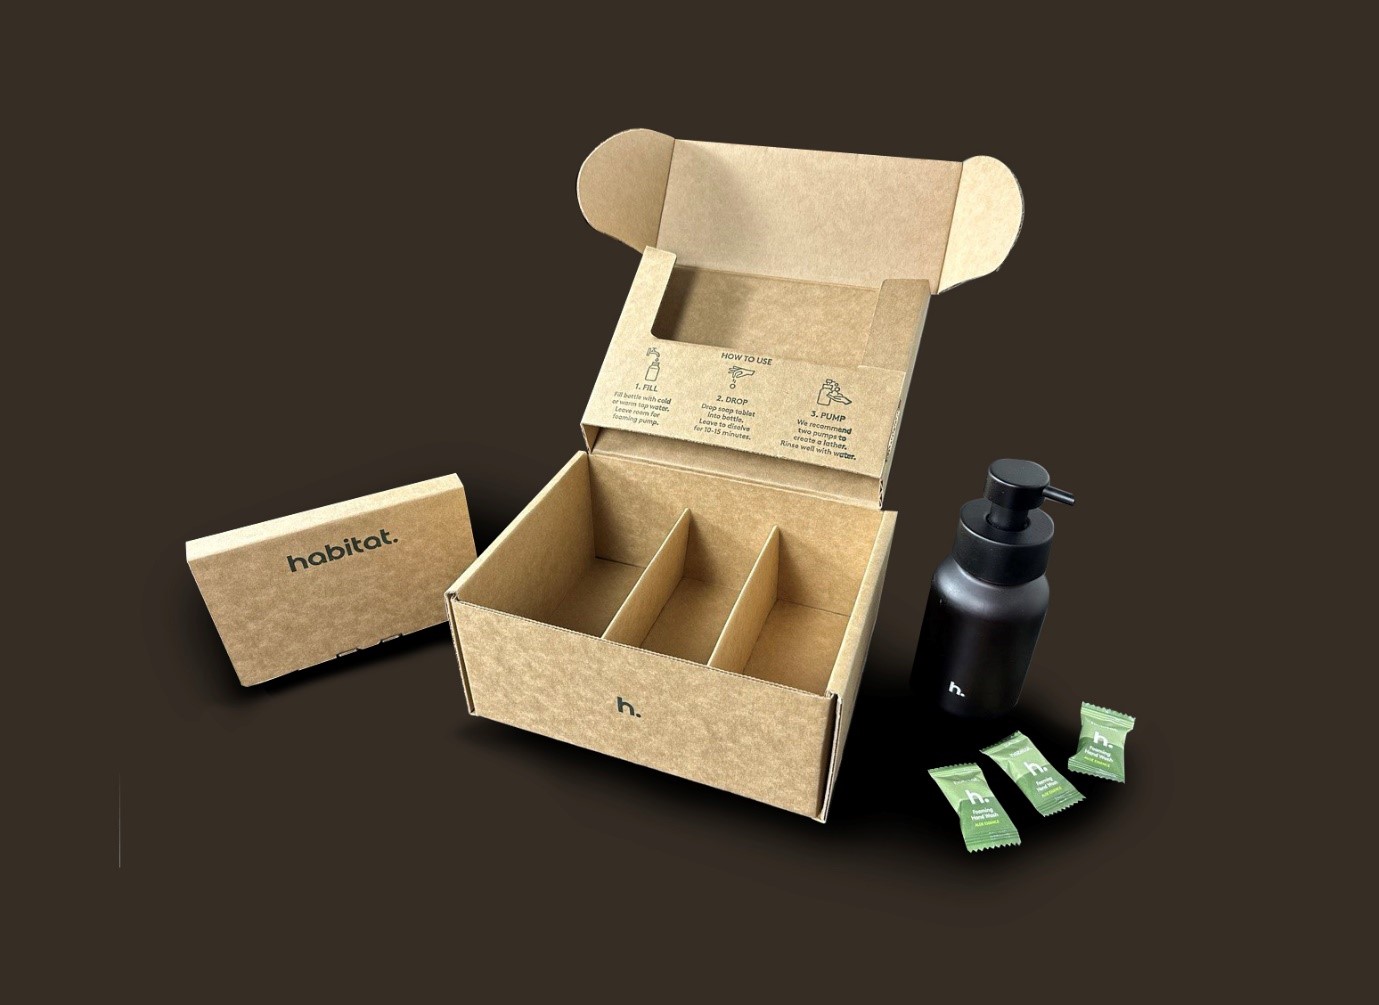 Product Packaging Box